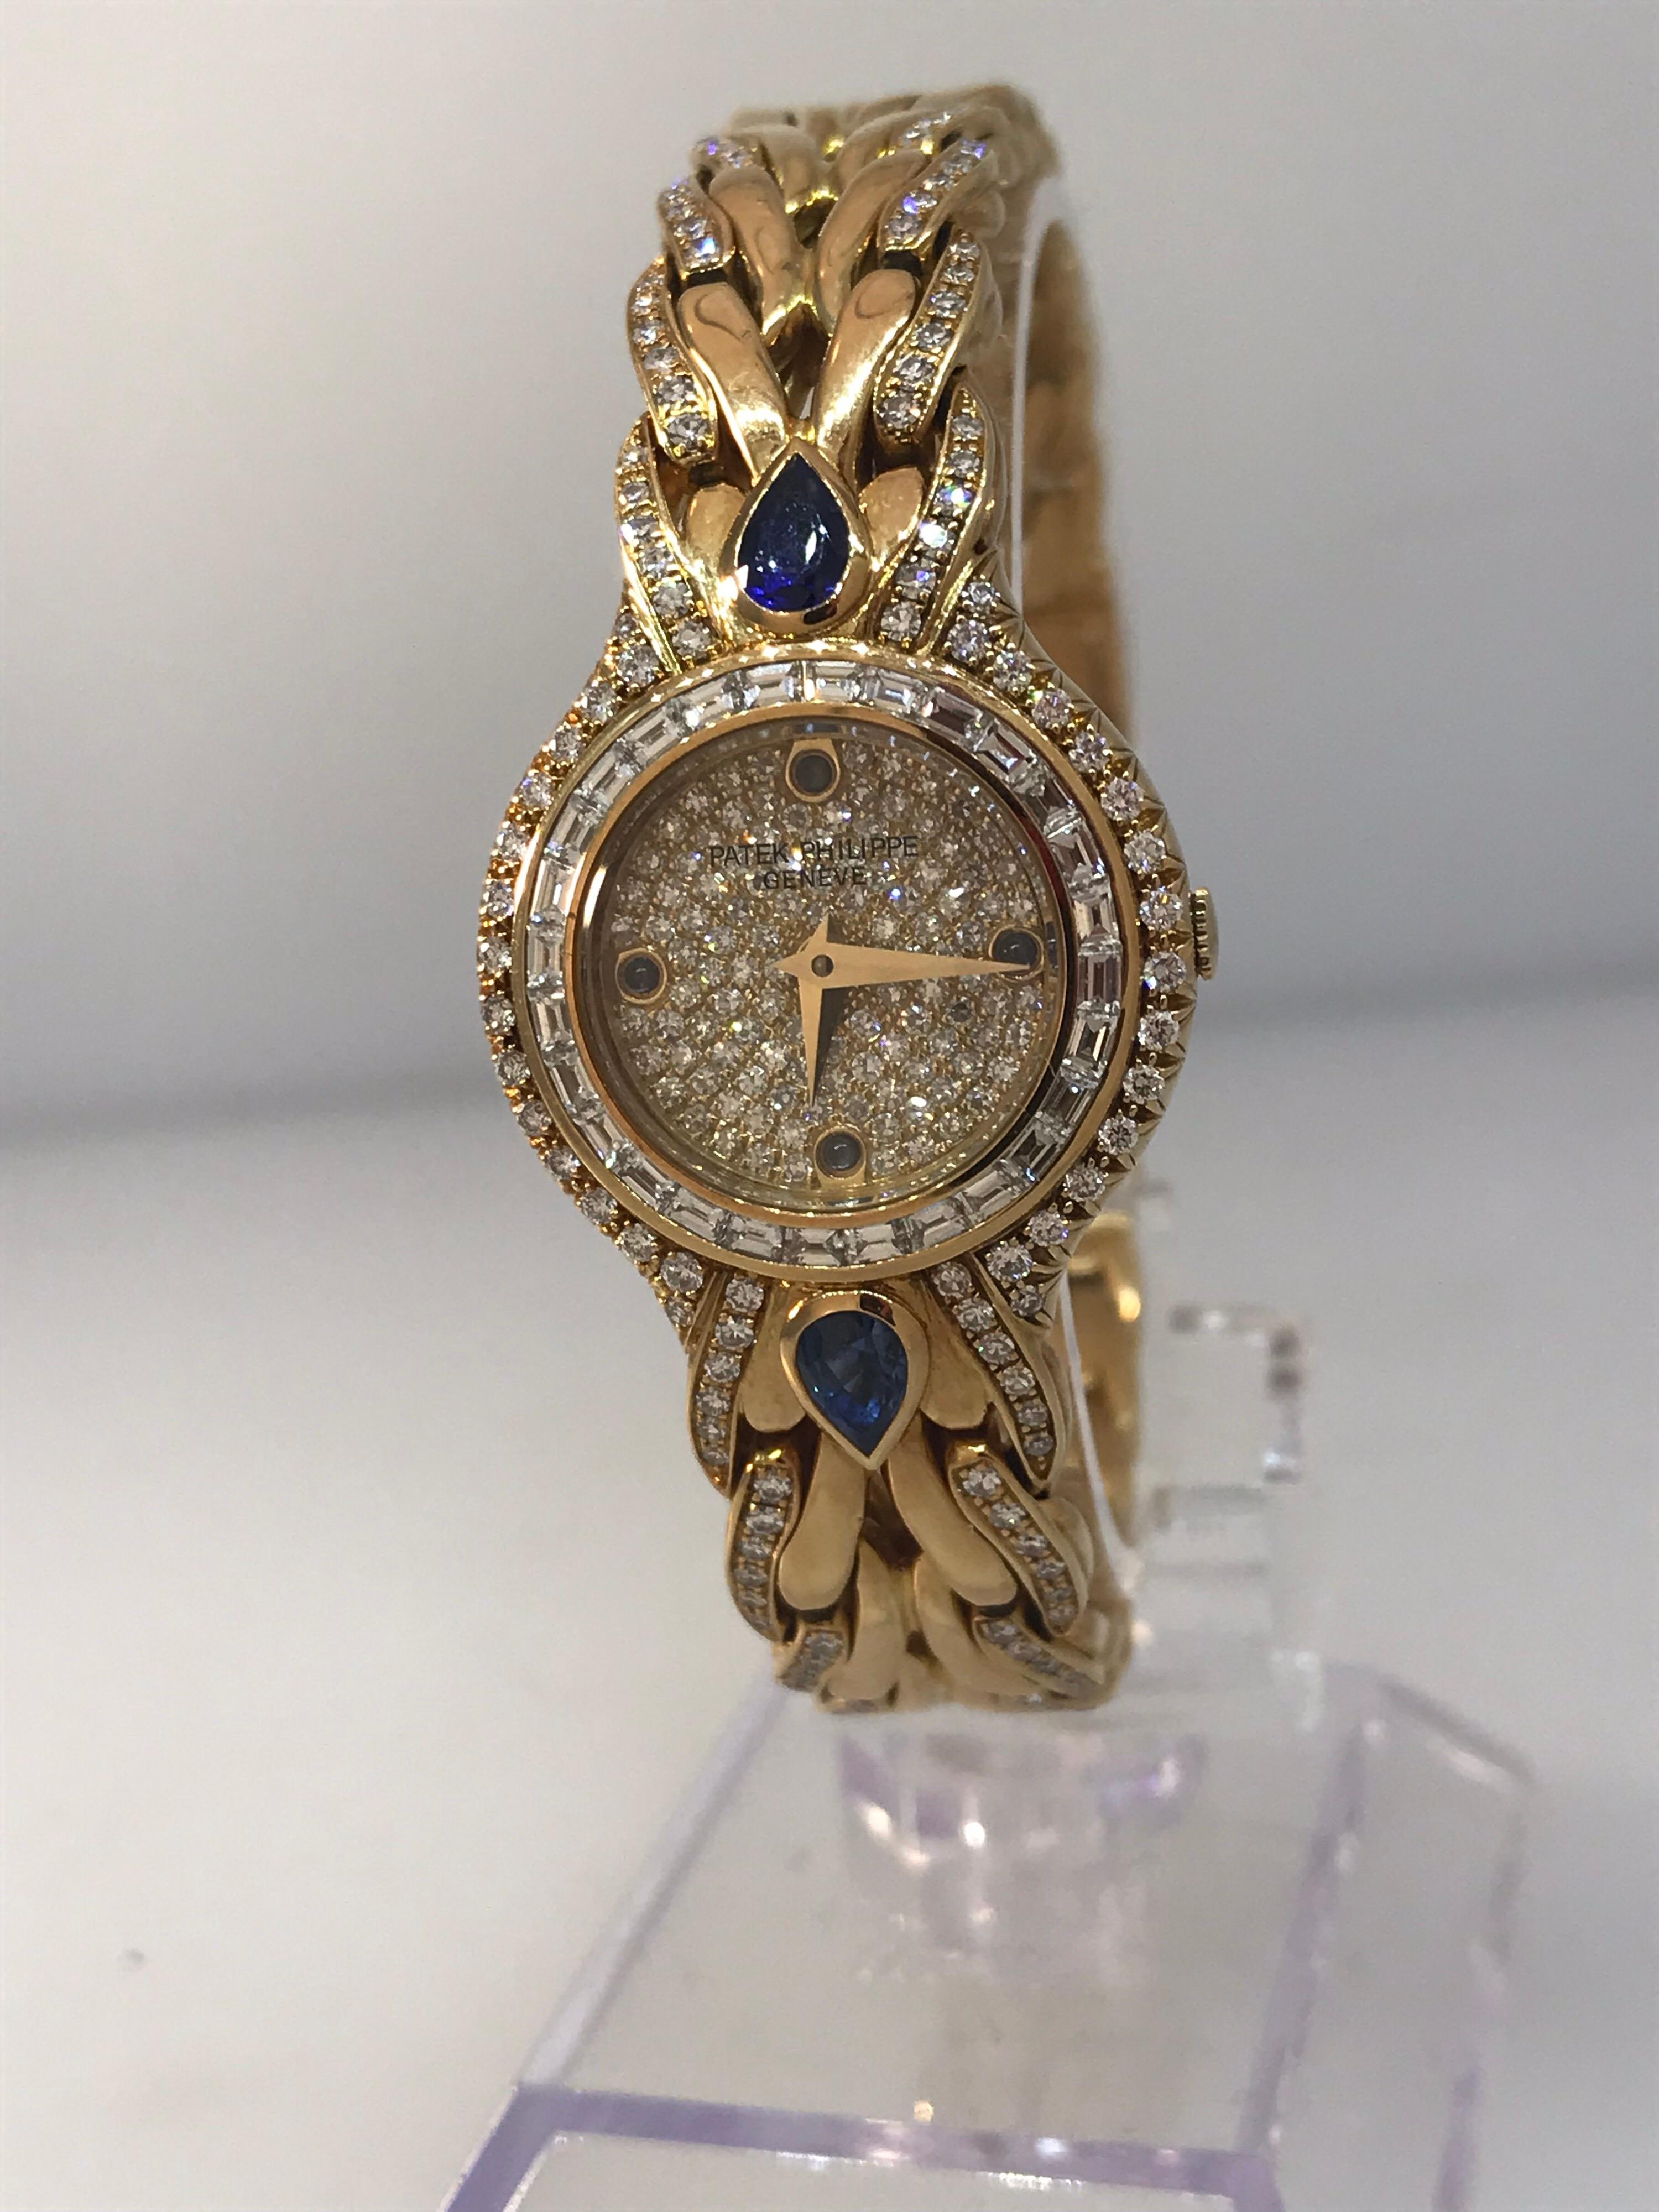 Patek La Flamme Ladies Watch

Model Number 4808

100% Authentic

New / Old stock

Comes with a generic watch box

18 Karat Yellow Gold

Bezel set with:

	 Square cut diamonds 
	 2 Large blue sapphires 
	 Round diamonds 

Pave Diamond dial with blue